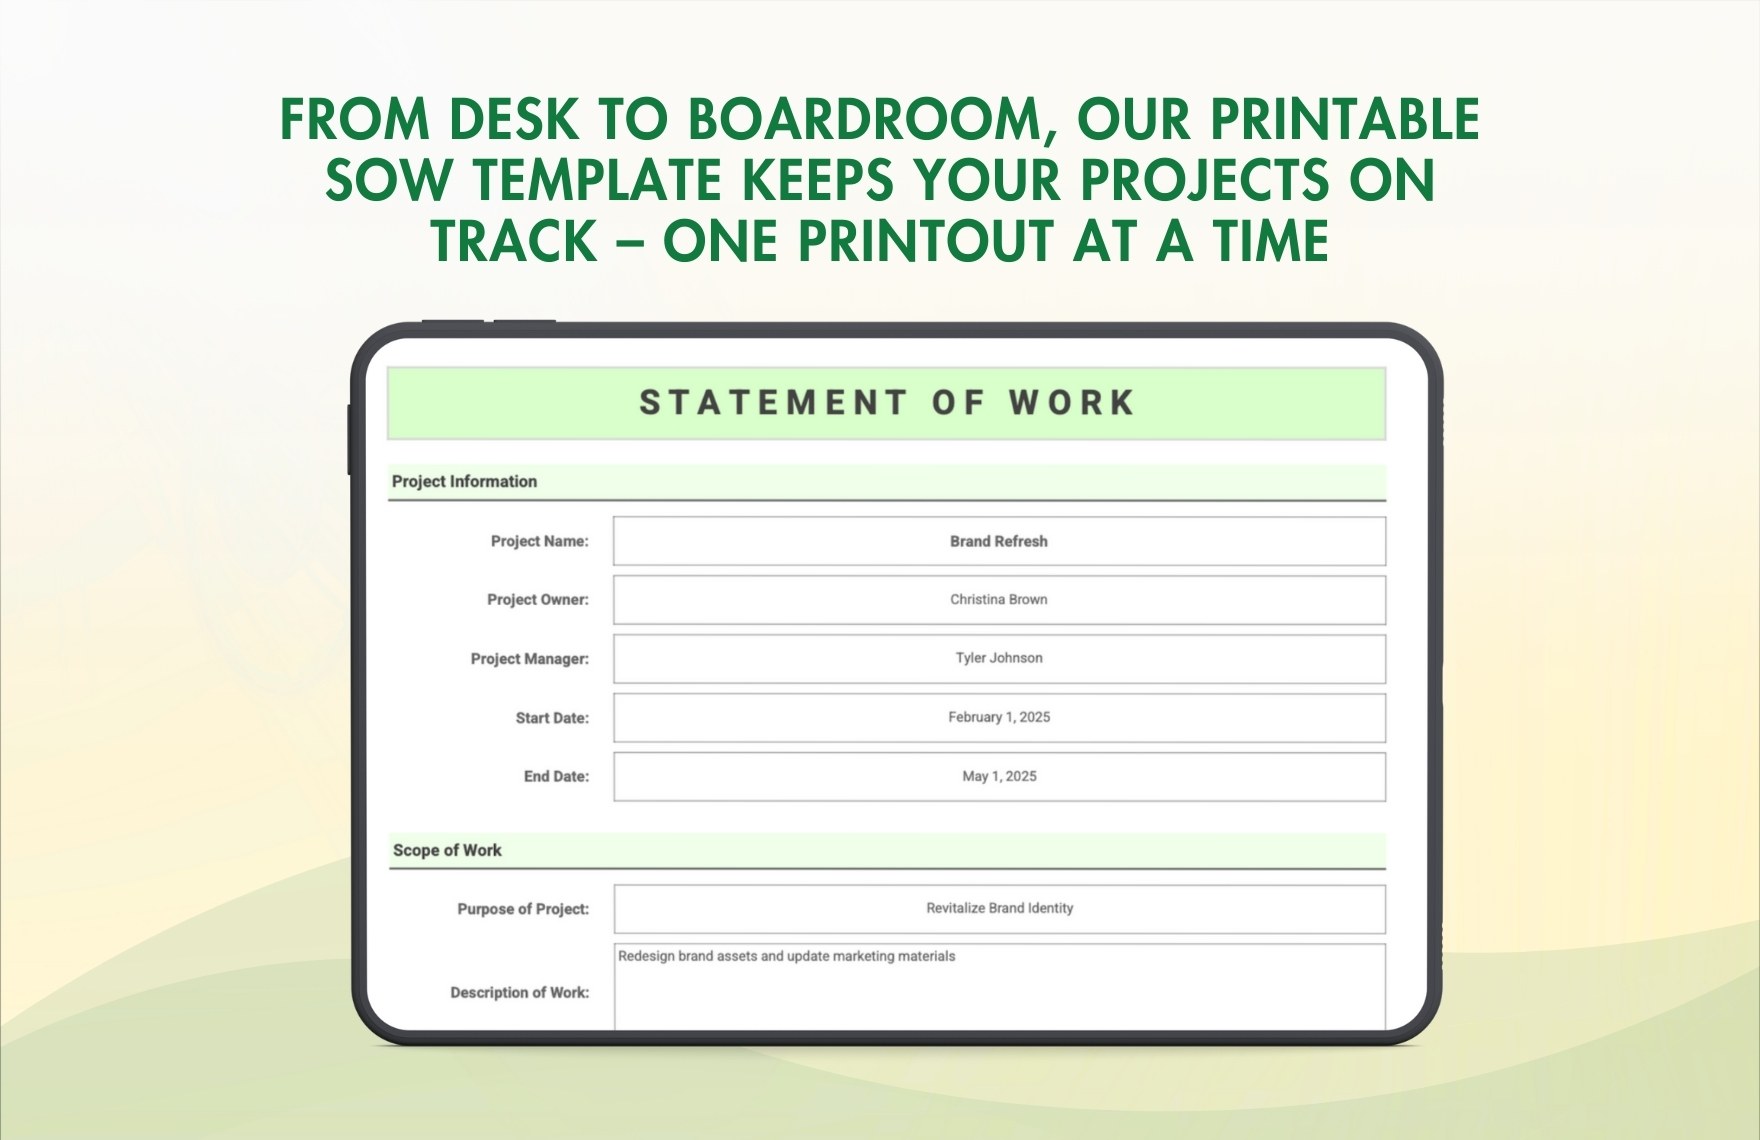 Printable Statement of Work Template